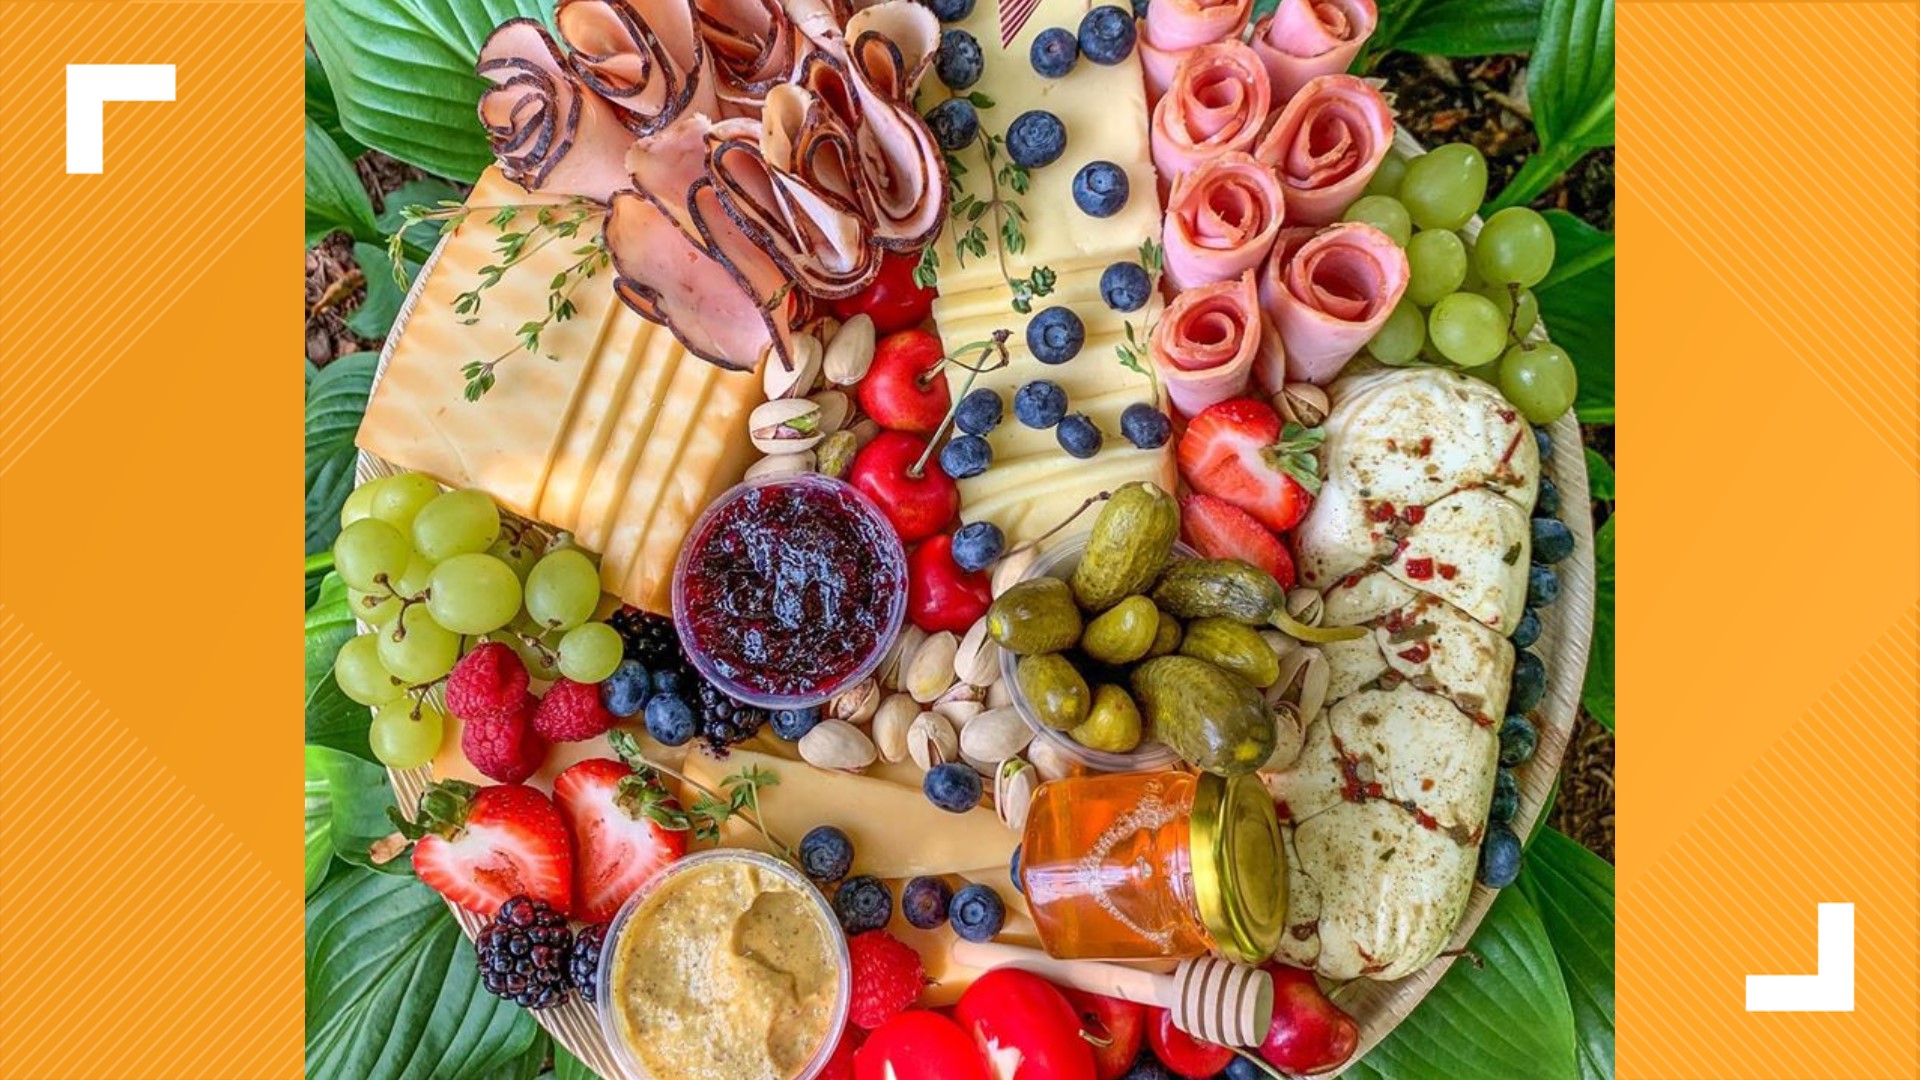 Local business specializes in cheeseboards for any occasion